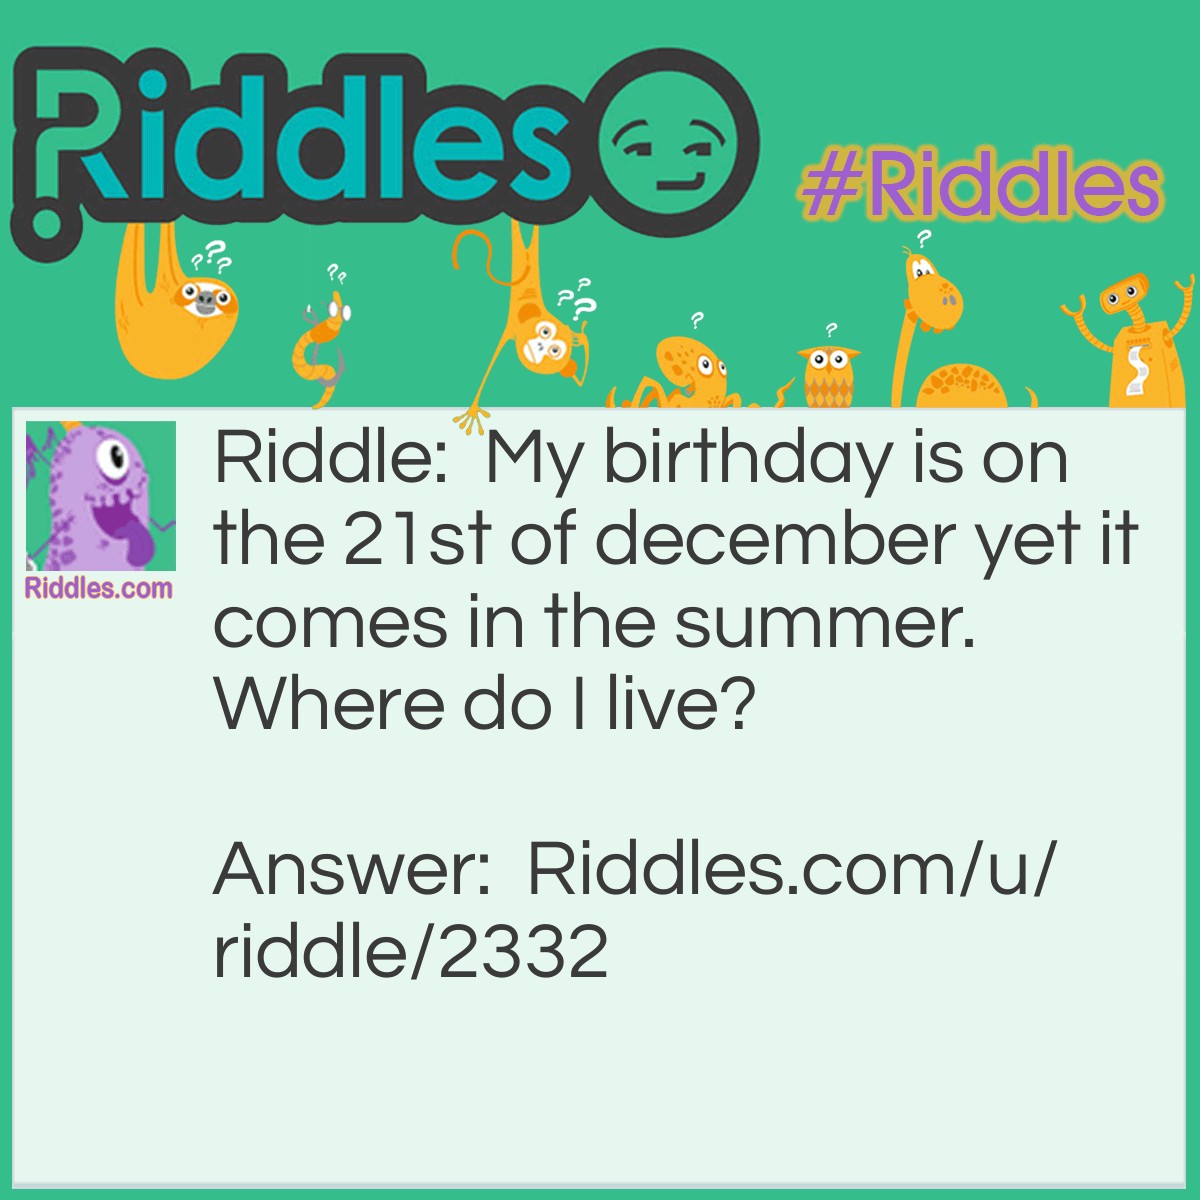 Riddle: My birthday is on the 21st of December yet it comes in the summer. Where do I live? Answer: I live in the southern hemisphere.